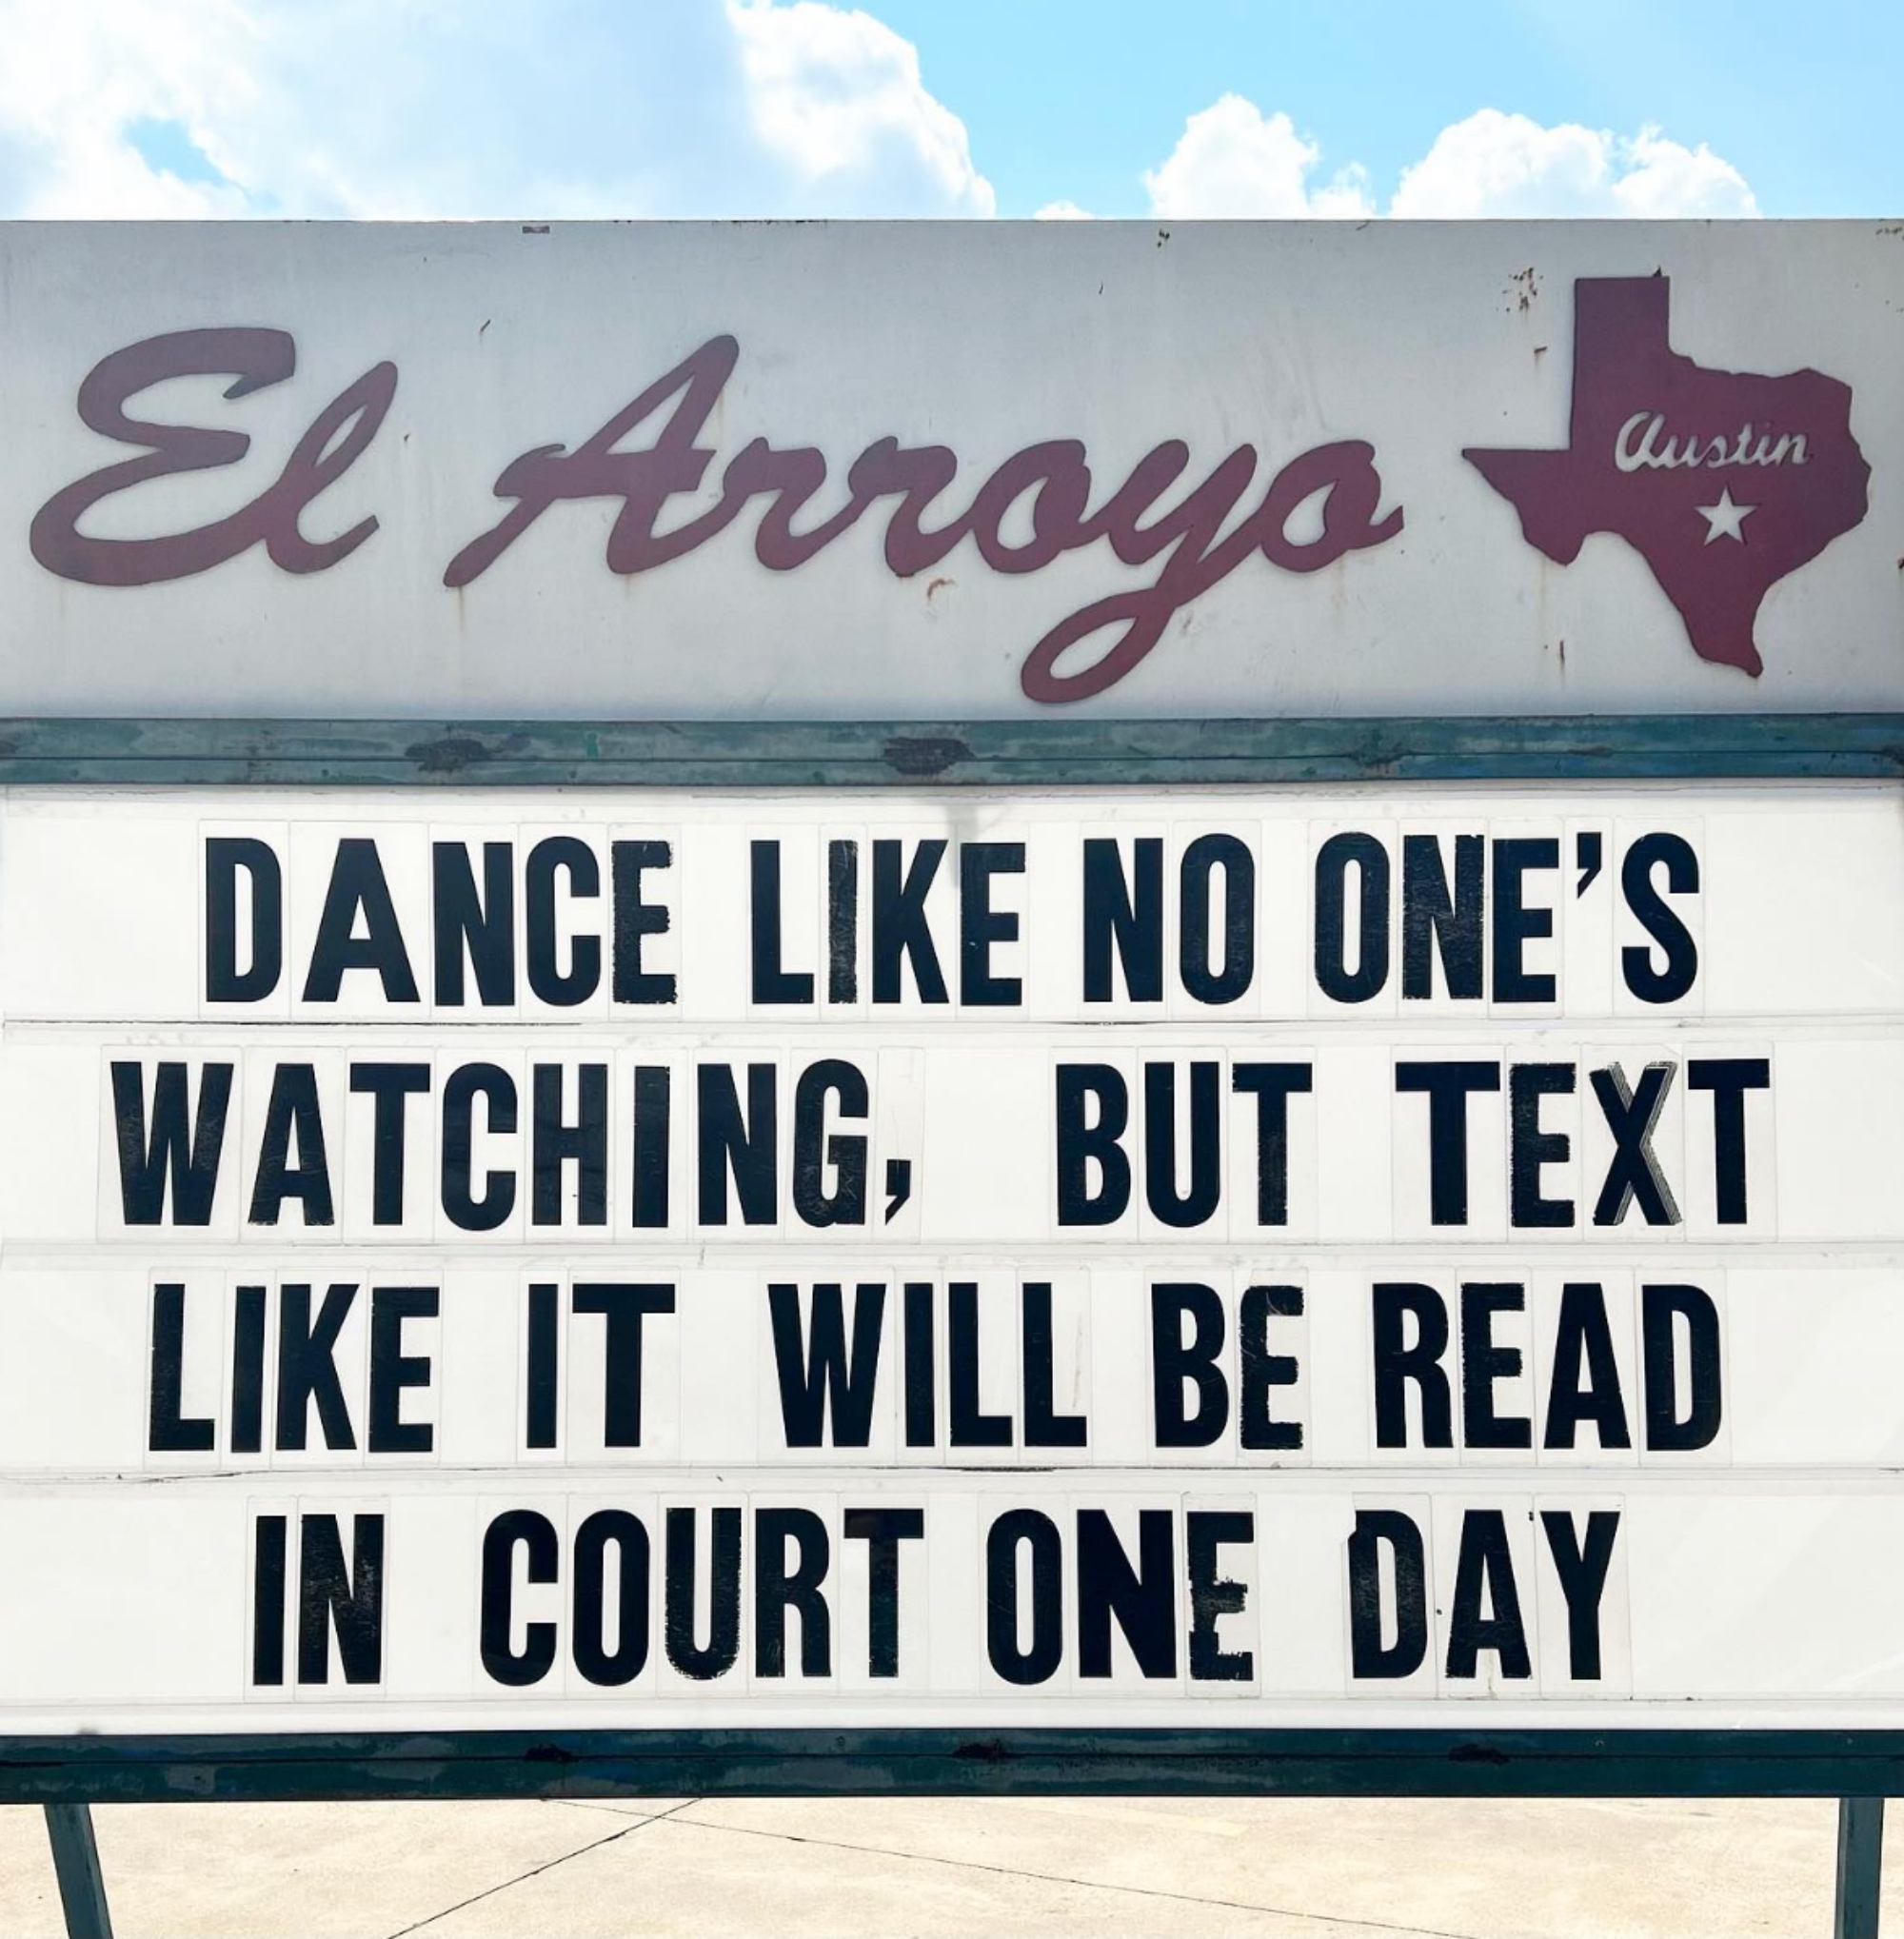 hilarious meme about dancing and texting